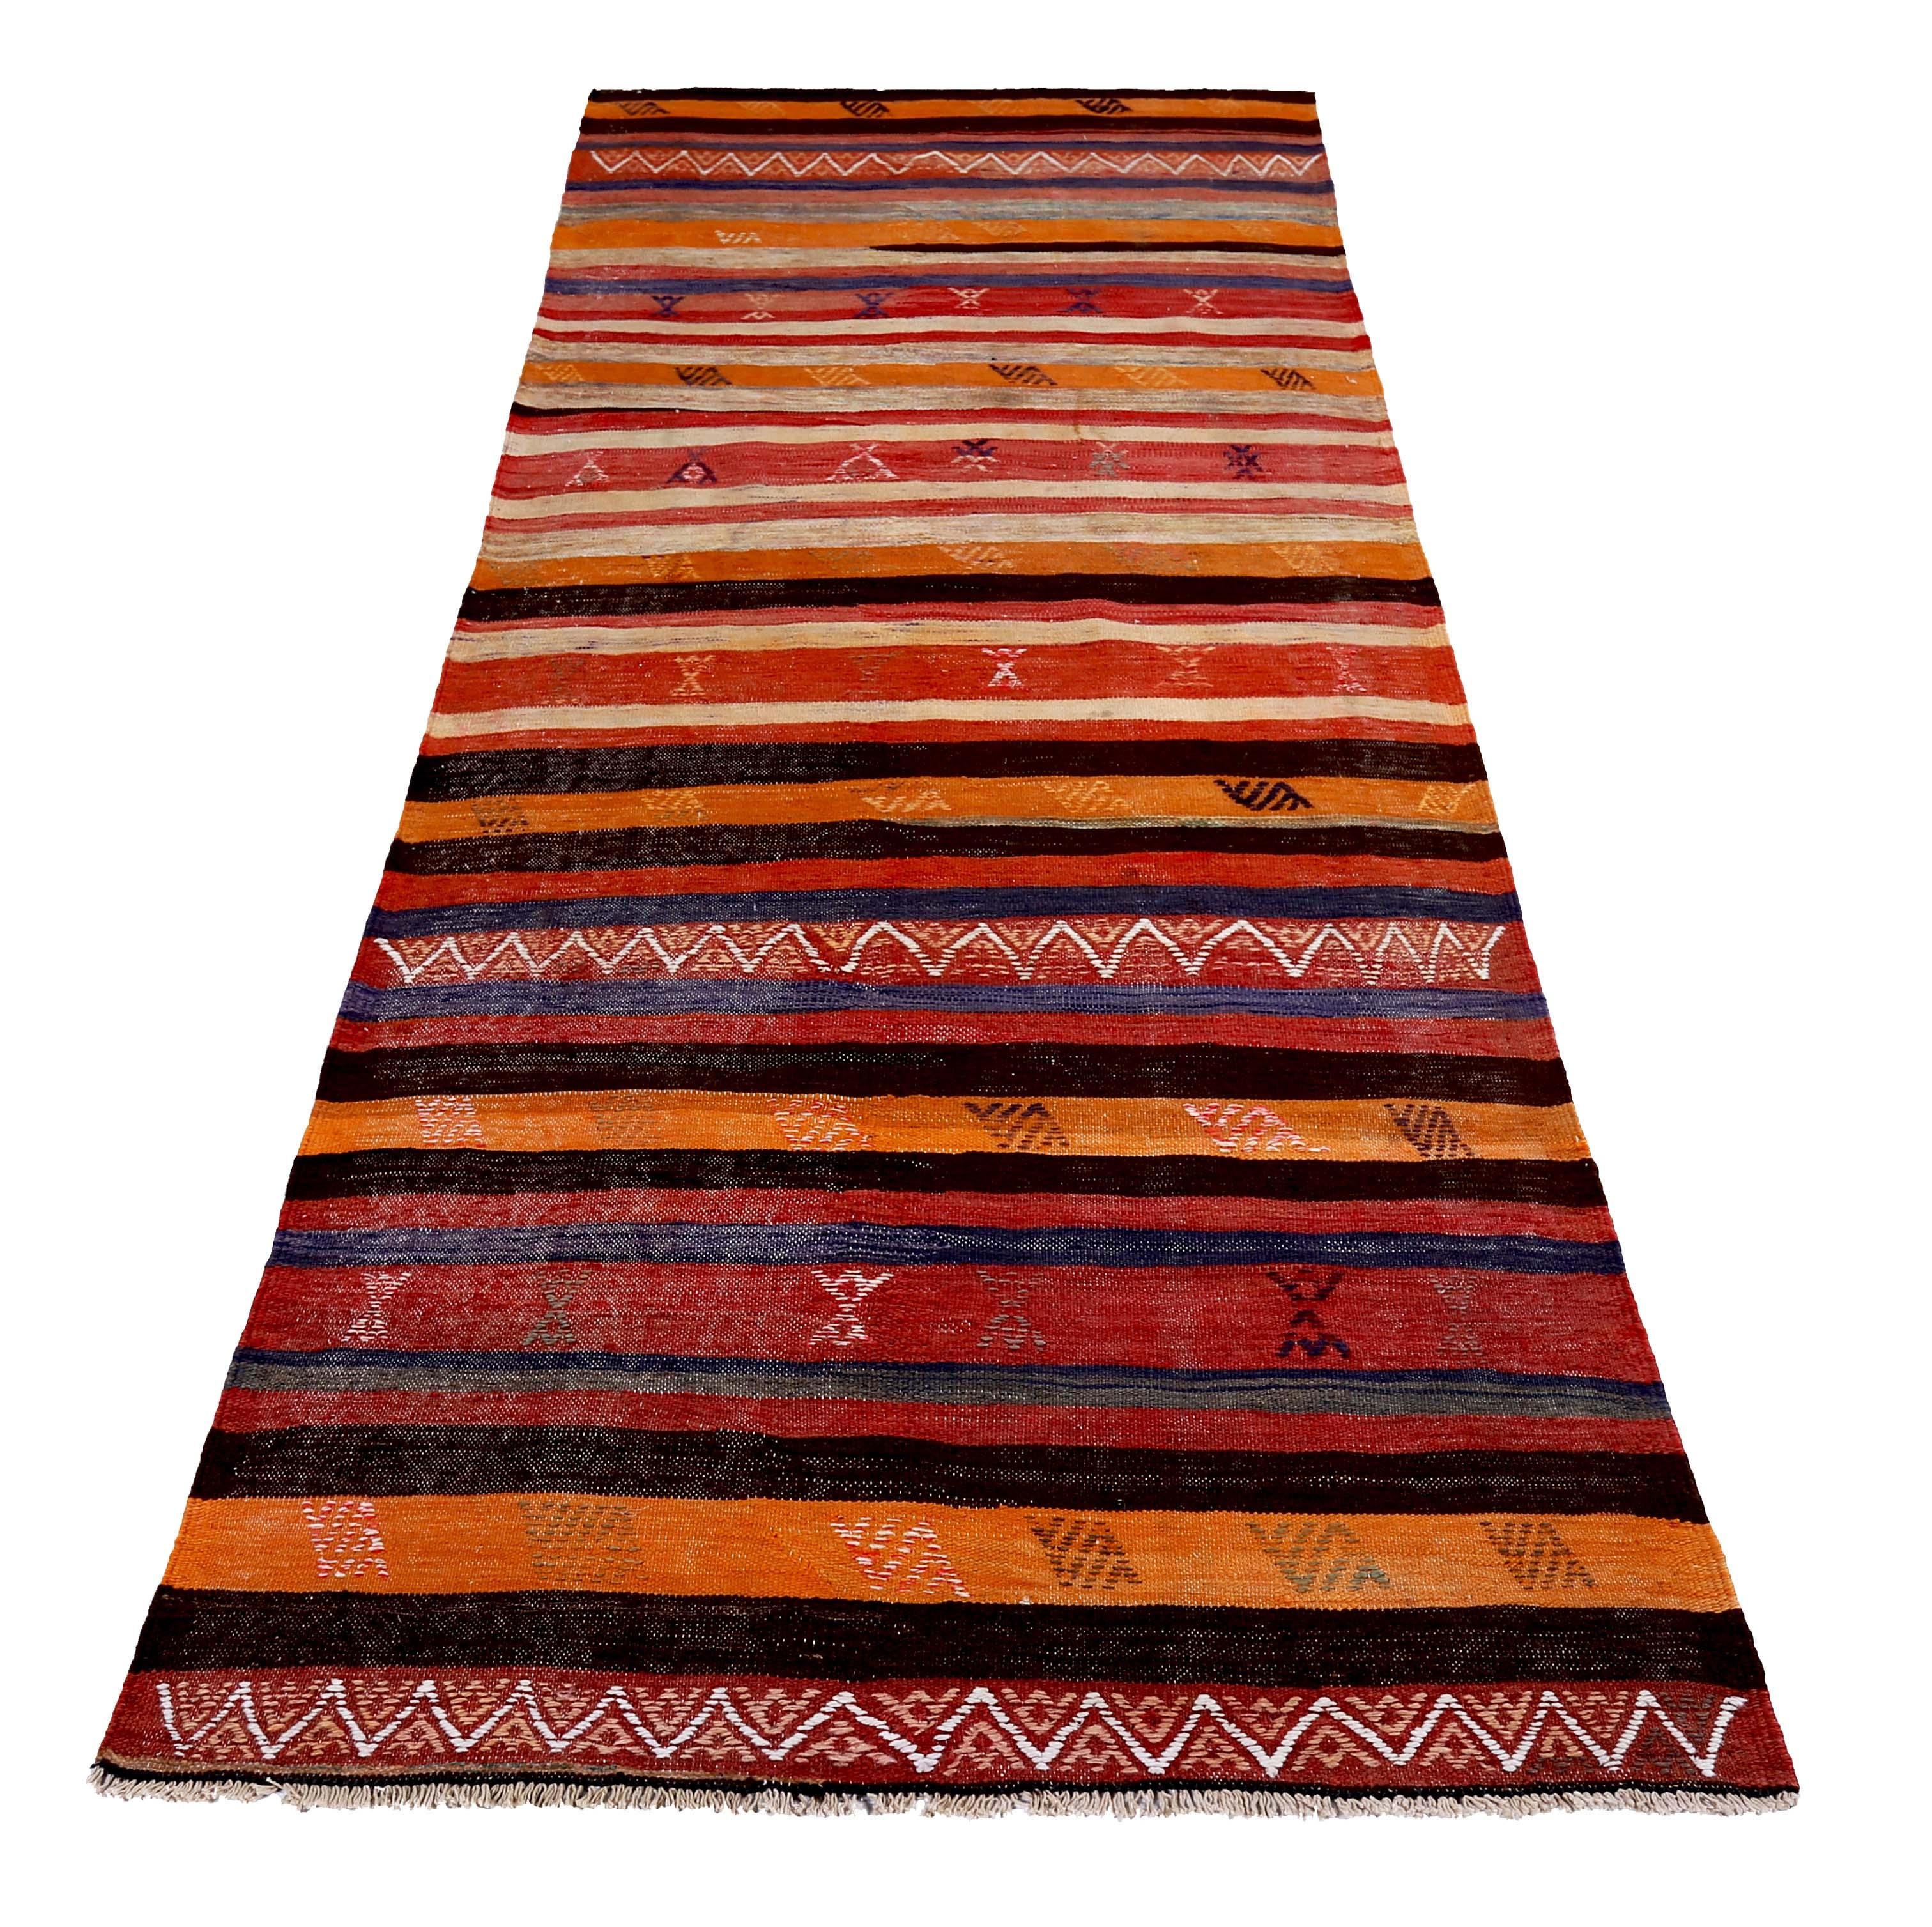 Turkish runner rug handwoven from the finest sheep’s wool and colored with all-natural vegetable dyes that are safe for humans and pets. It’s a traditional Kilim flat-weave design featuring a red and orange stripes with tribal details in white and